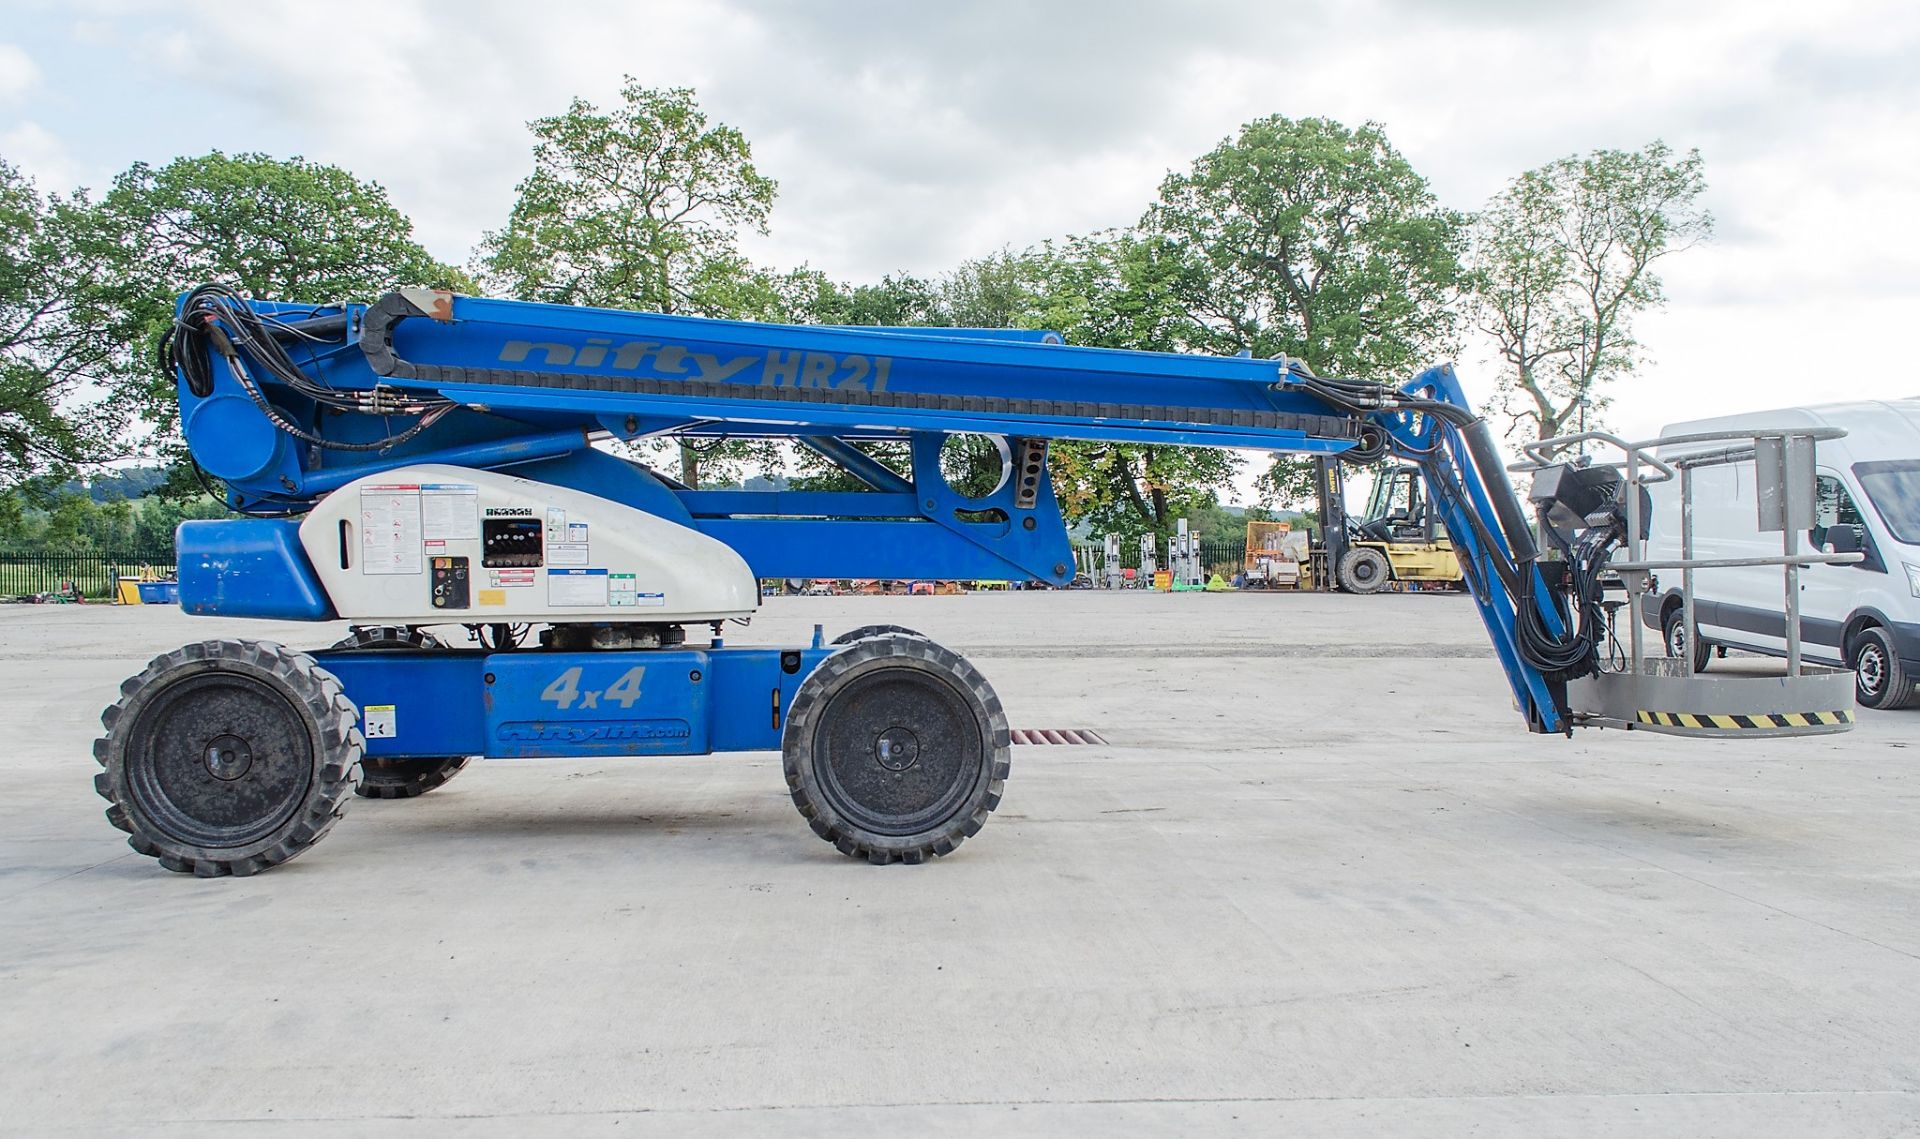 Nifty HR21D 4x4 diesel driven articulated boom access platform Year: 2007 S/N: 2116142 Recorded - Image 7 of 17